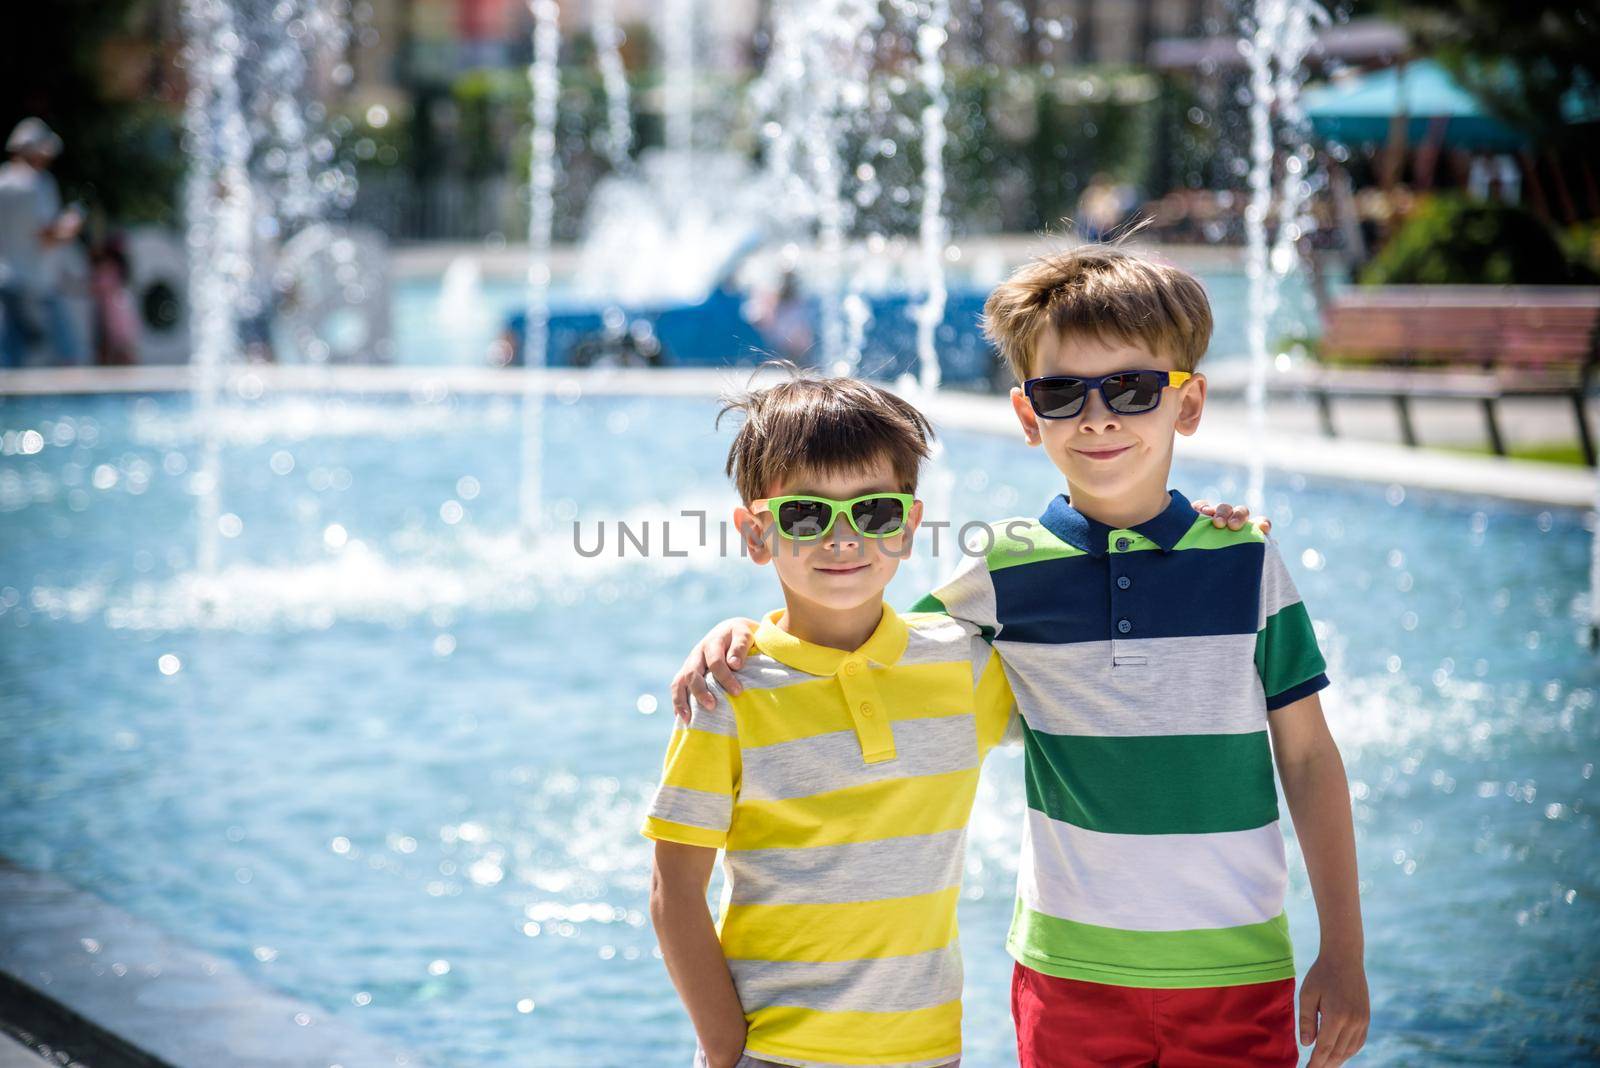 Group of happy children playing outdoors near pool or fountain. Kids embrace show thumb up in park during summer vacation. Dressed in colorful t-shirts and shorts with sunglasses. Summer holiday concept by Kobysh